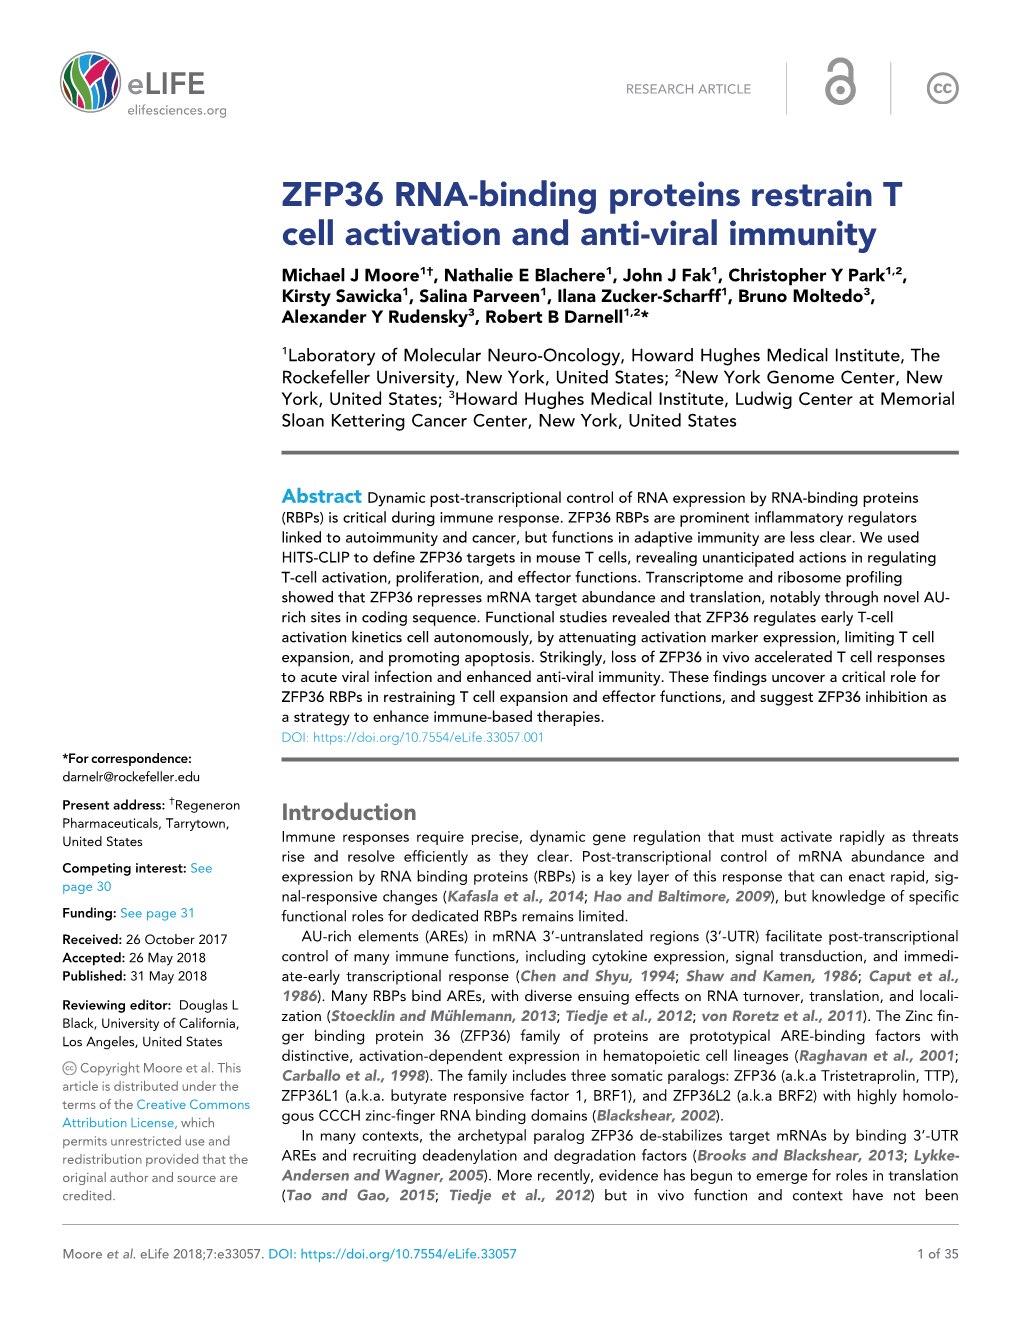 ZFP36 RNA-Binding Proteins Restrain T Cell Activation and Anti-Viral